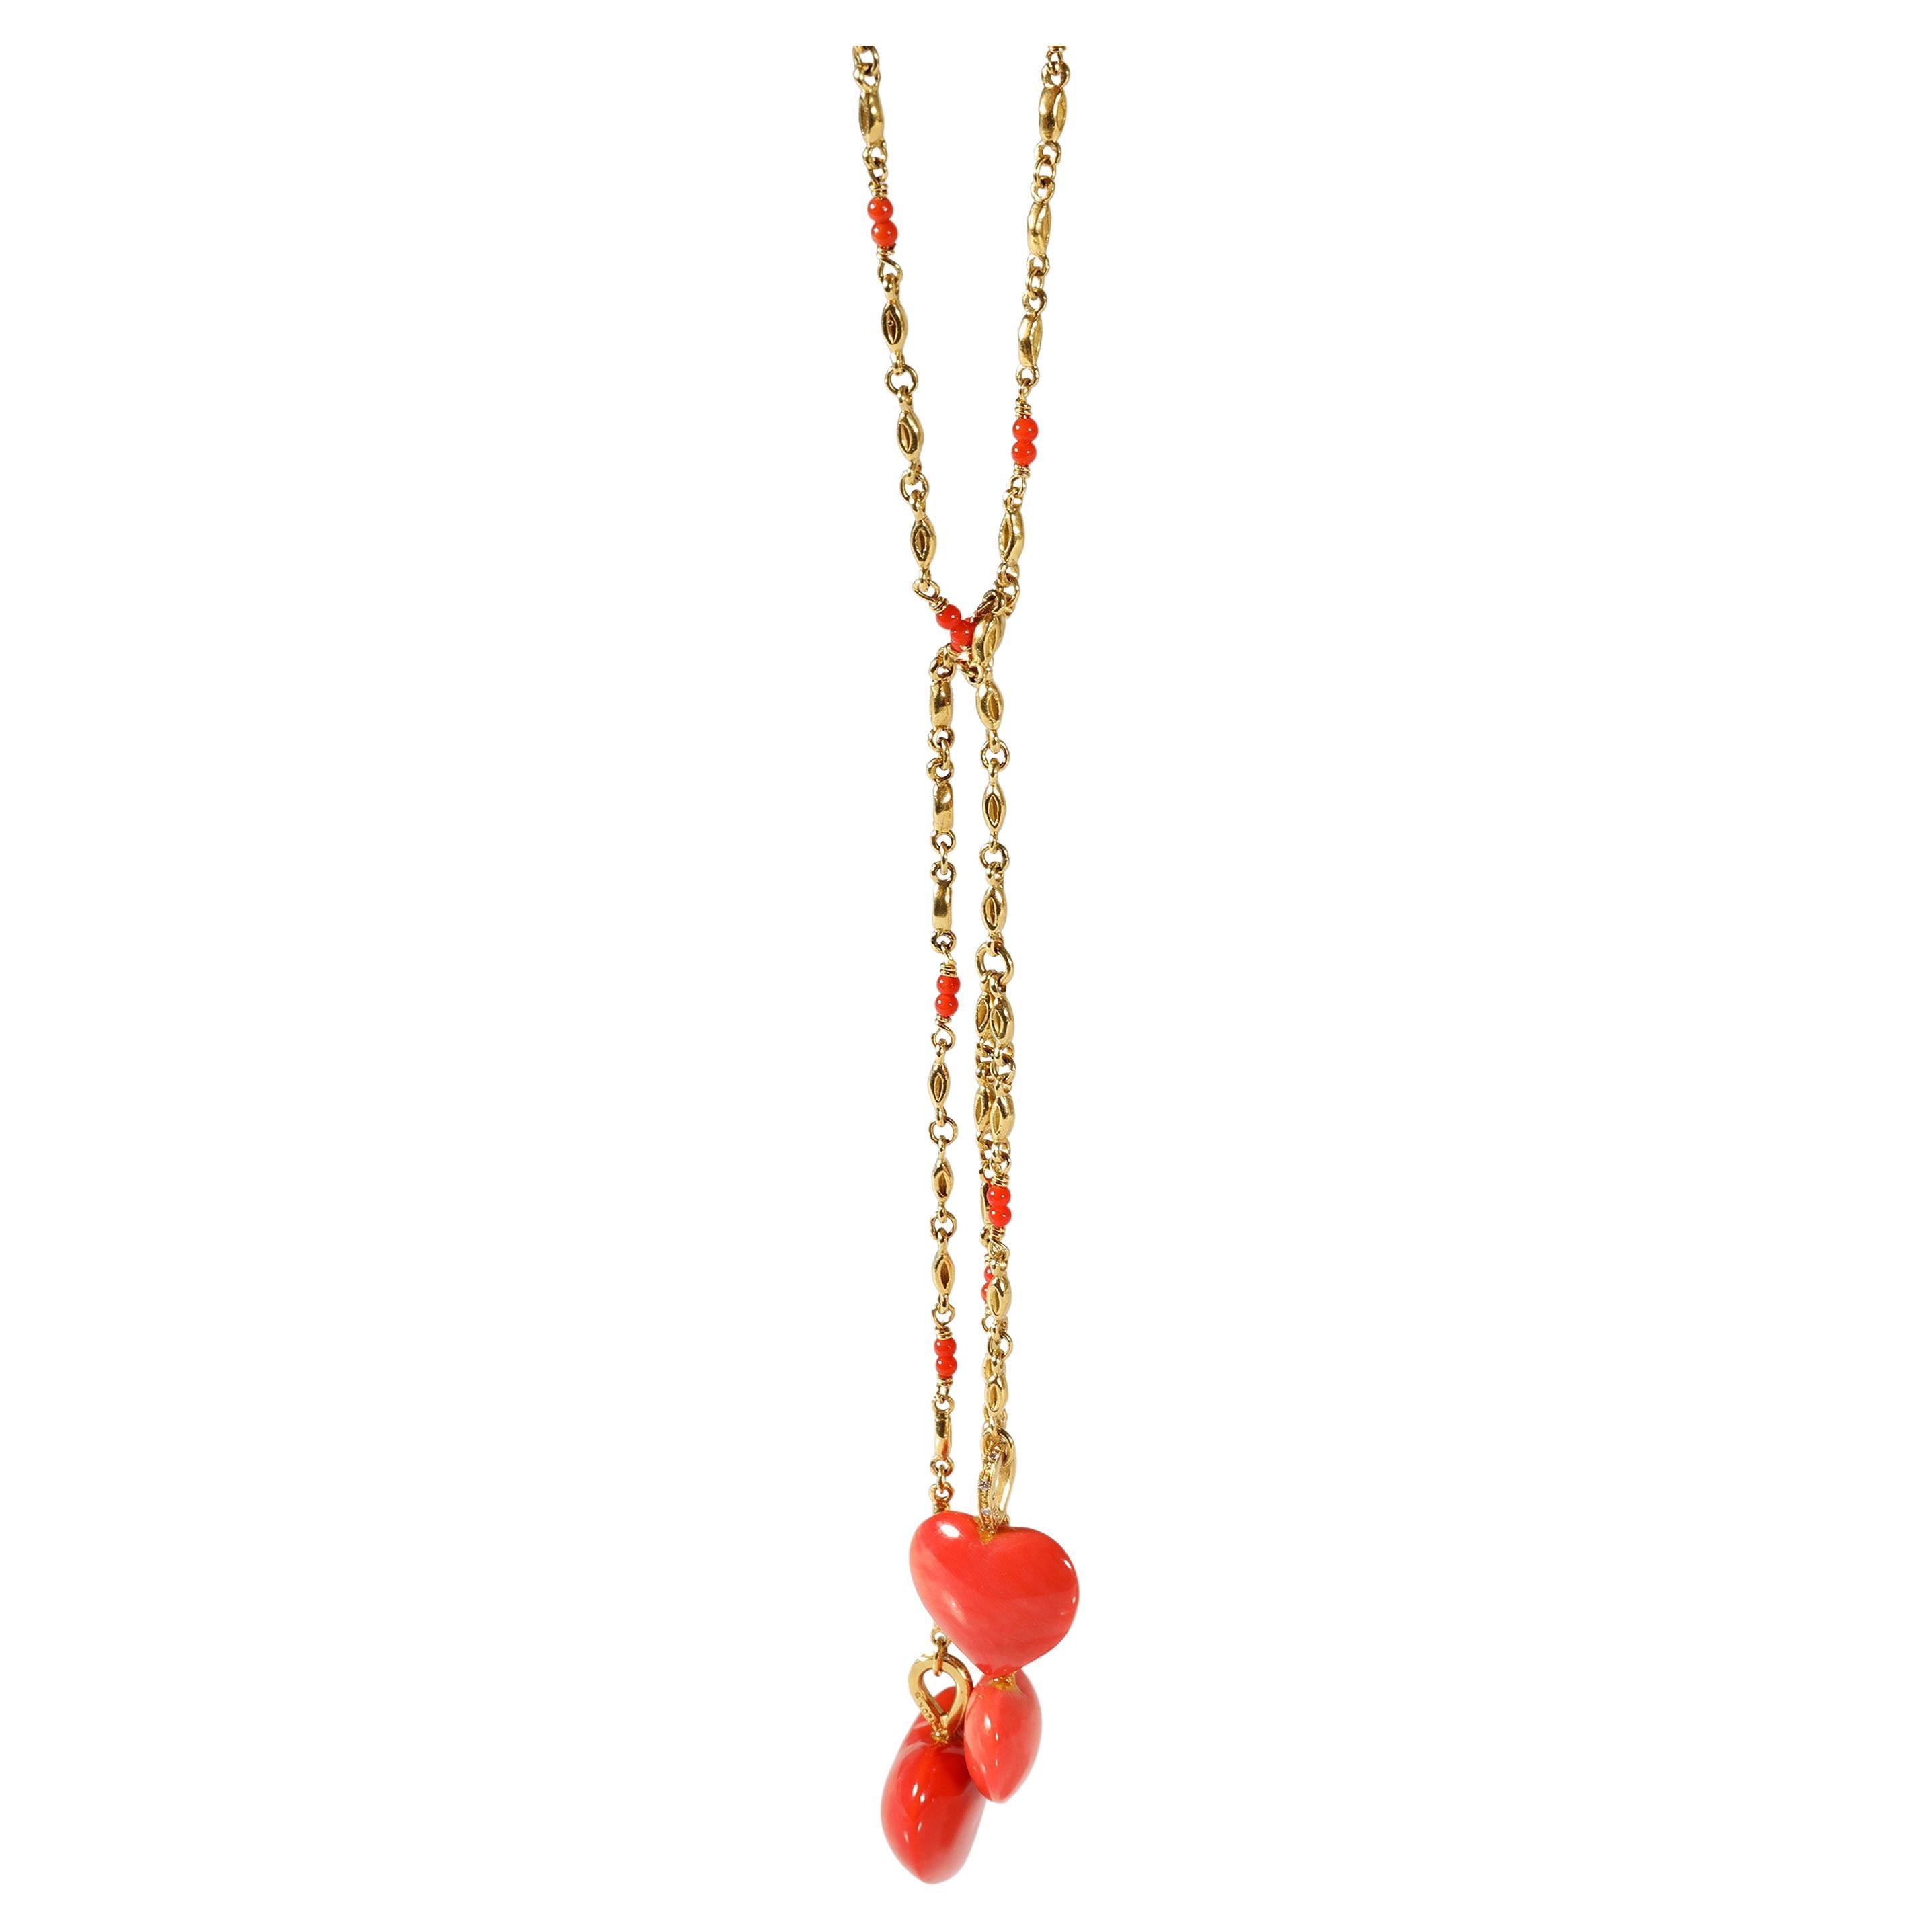 Coral Lariat Necklace with Hearts Necklace in 20k Yellow Gold